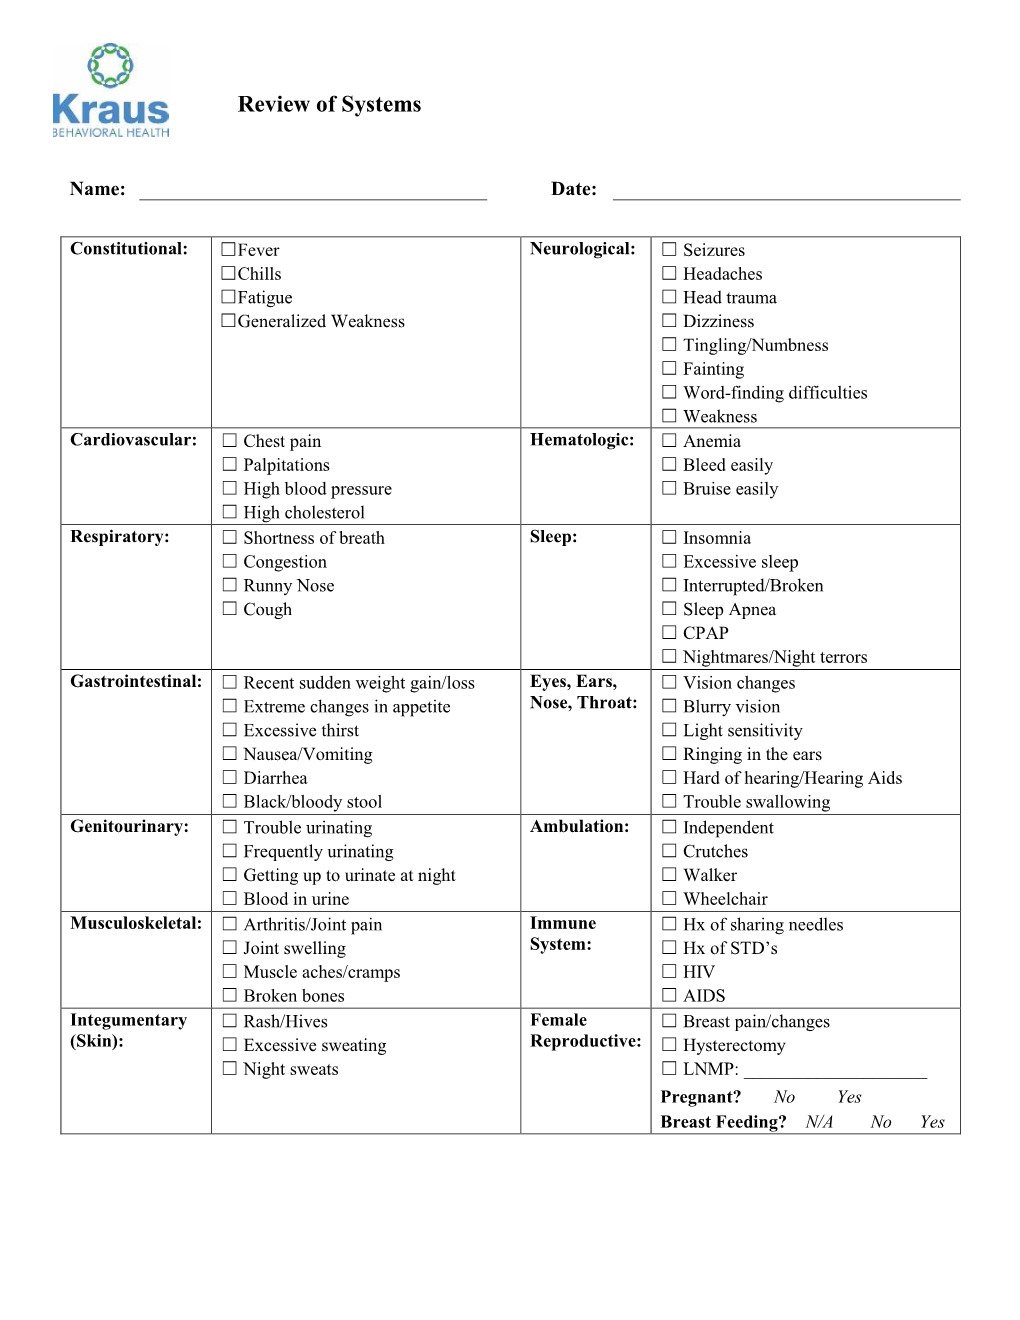 Patient Review of Systems and Scales